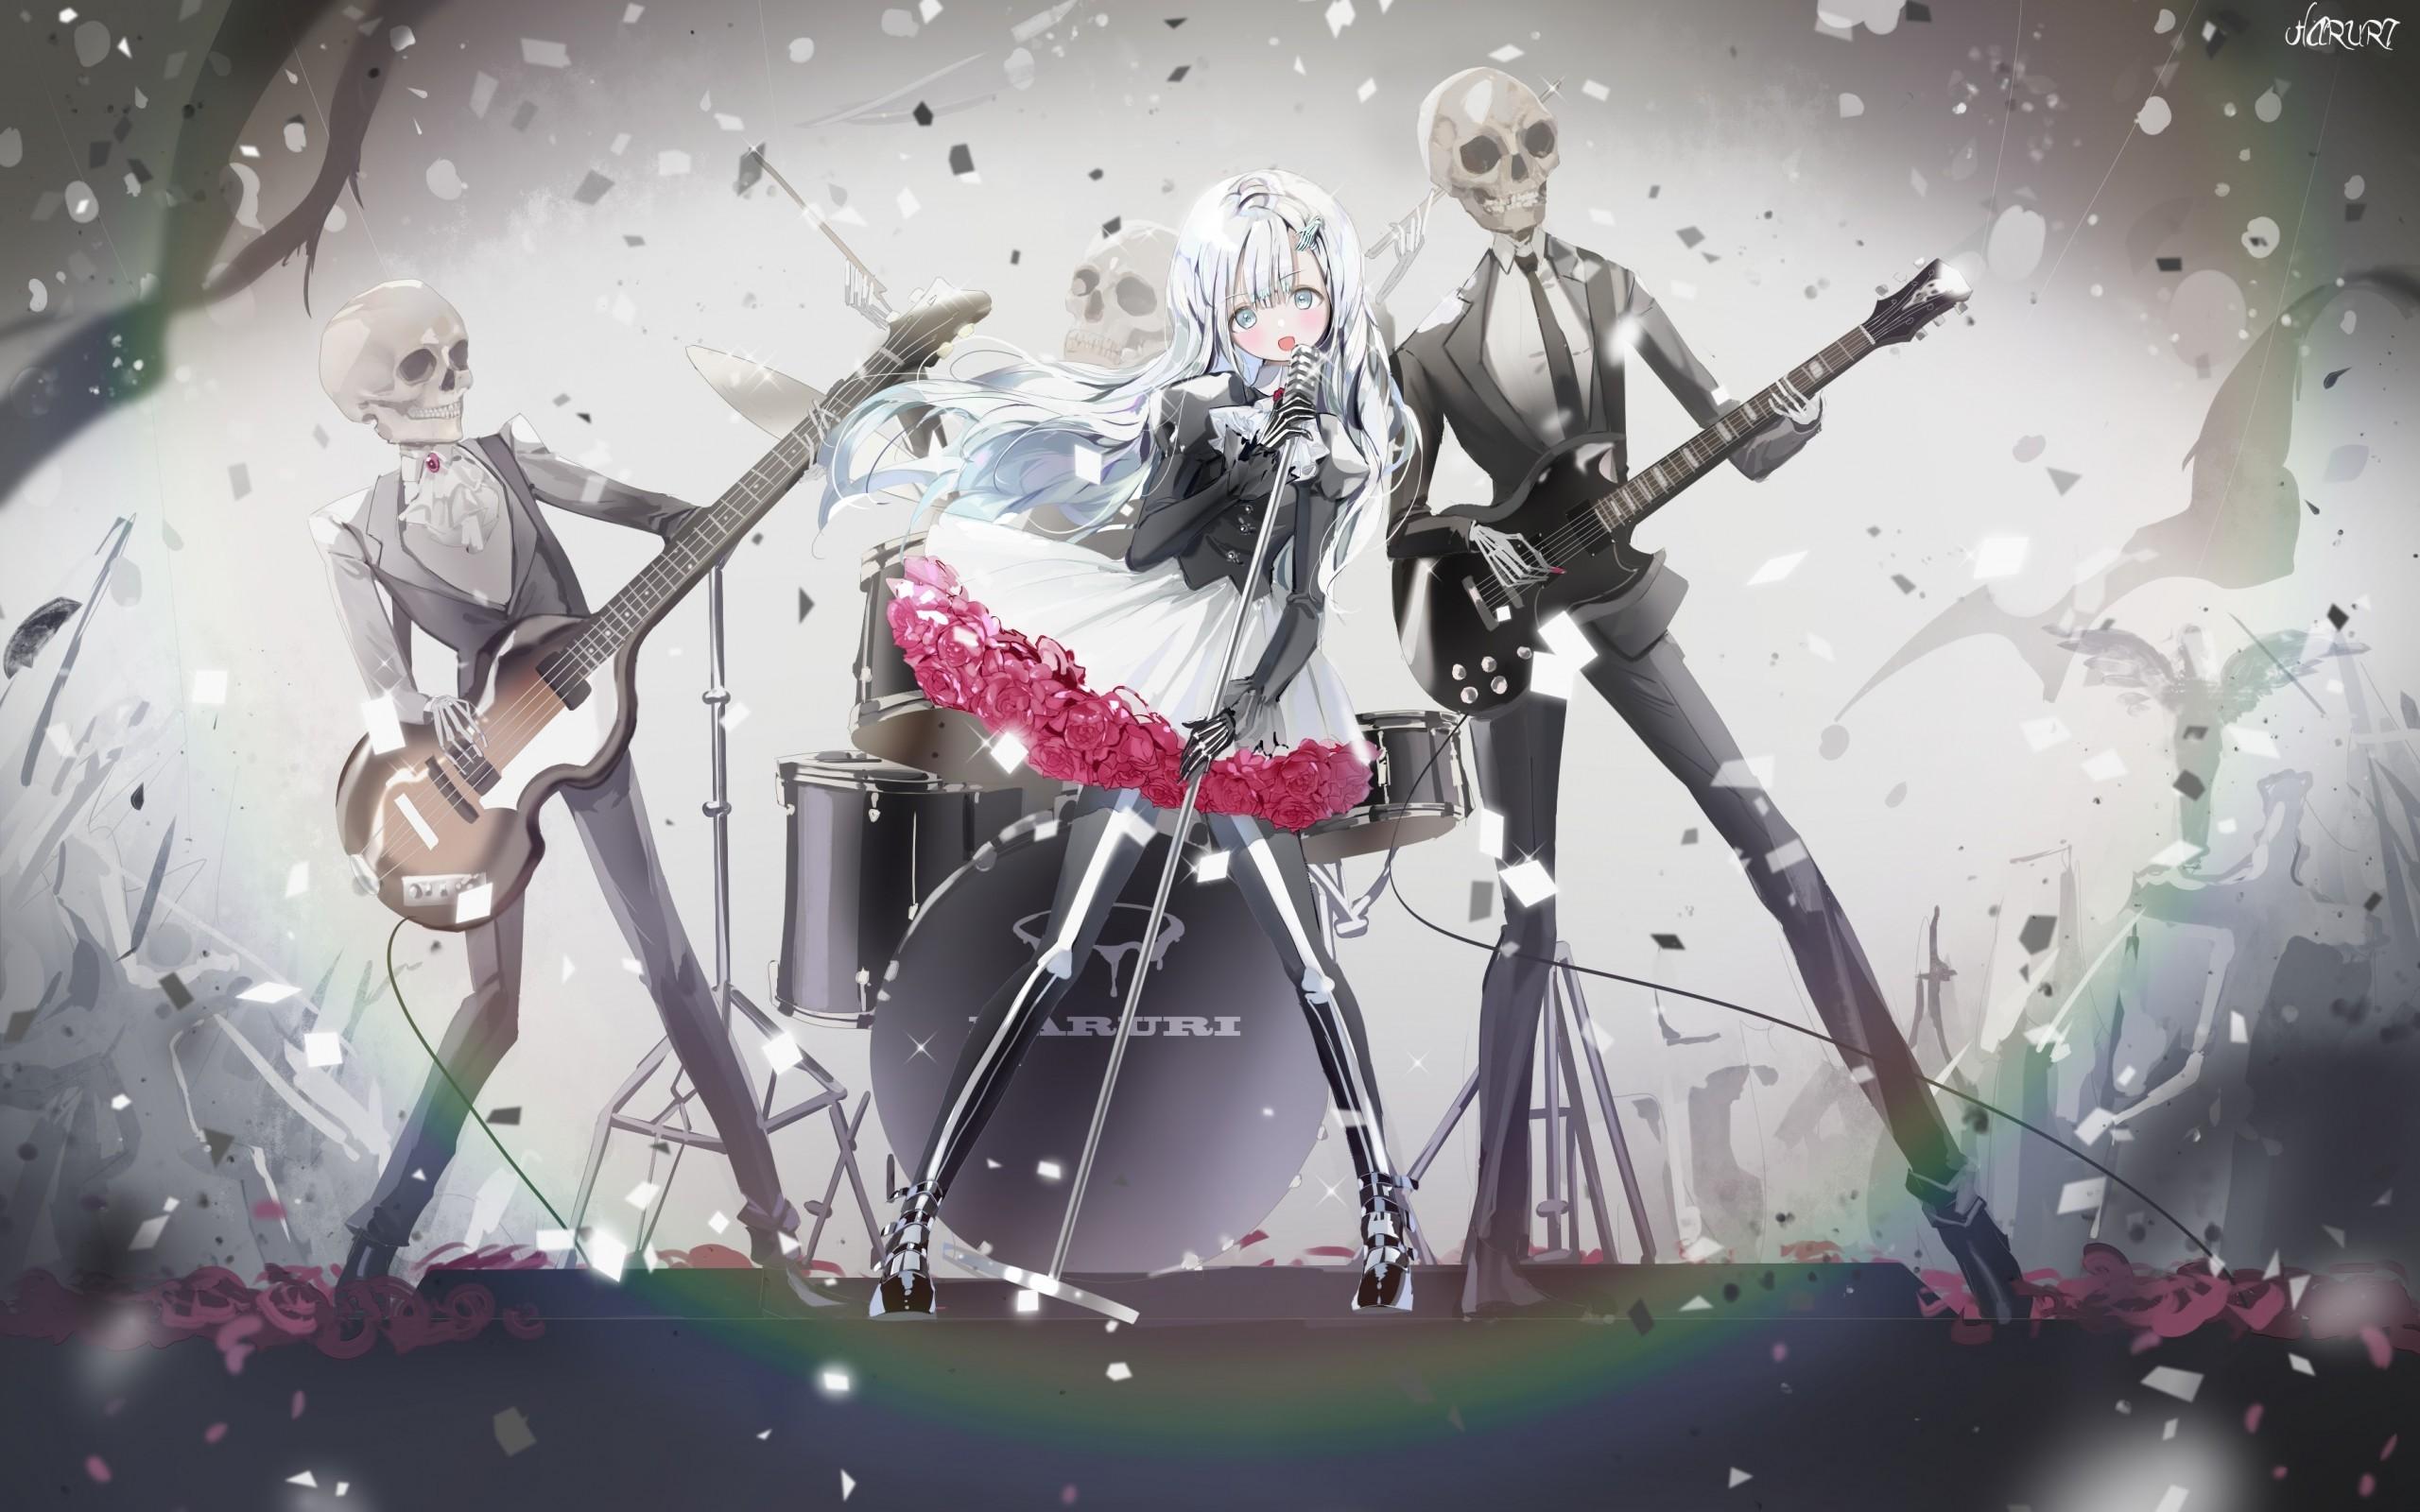 Download 2560x1600 Anime Rock Band .wallpapermaiden.com